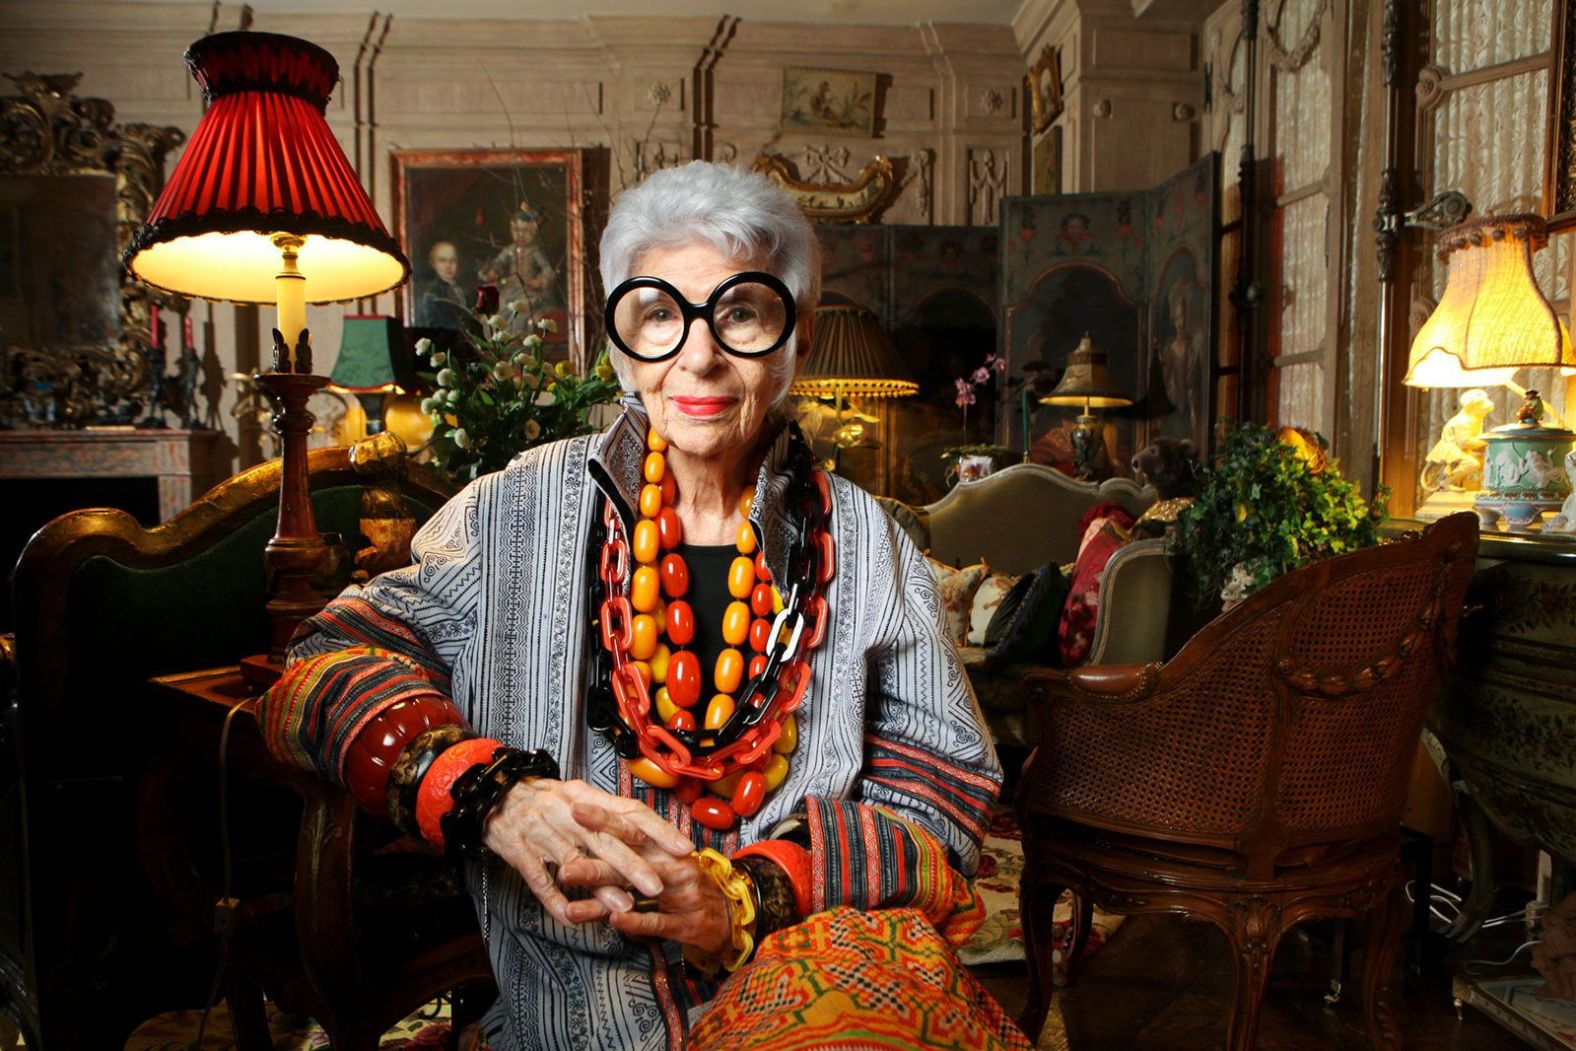 Influential interior designer <a href="https://www.cnn.com/2024/03/01/style/iris-apfel-fashion-icon-dies-obituary/index.html" target="_blank">Iris Apfel</a>, a style icon who landed a major modeling contract at 97, died March 1 at the age of 102.